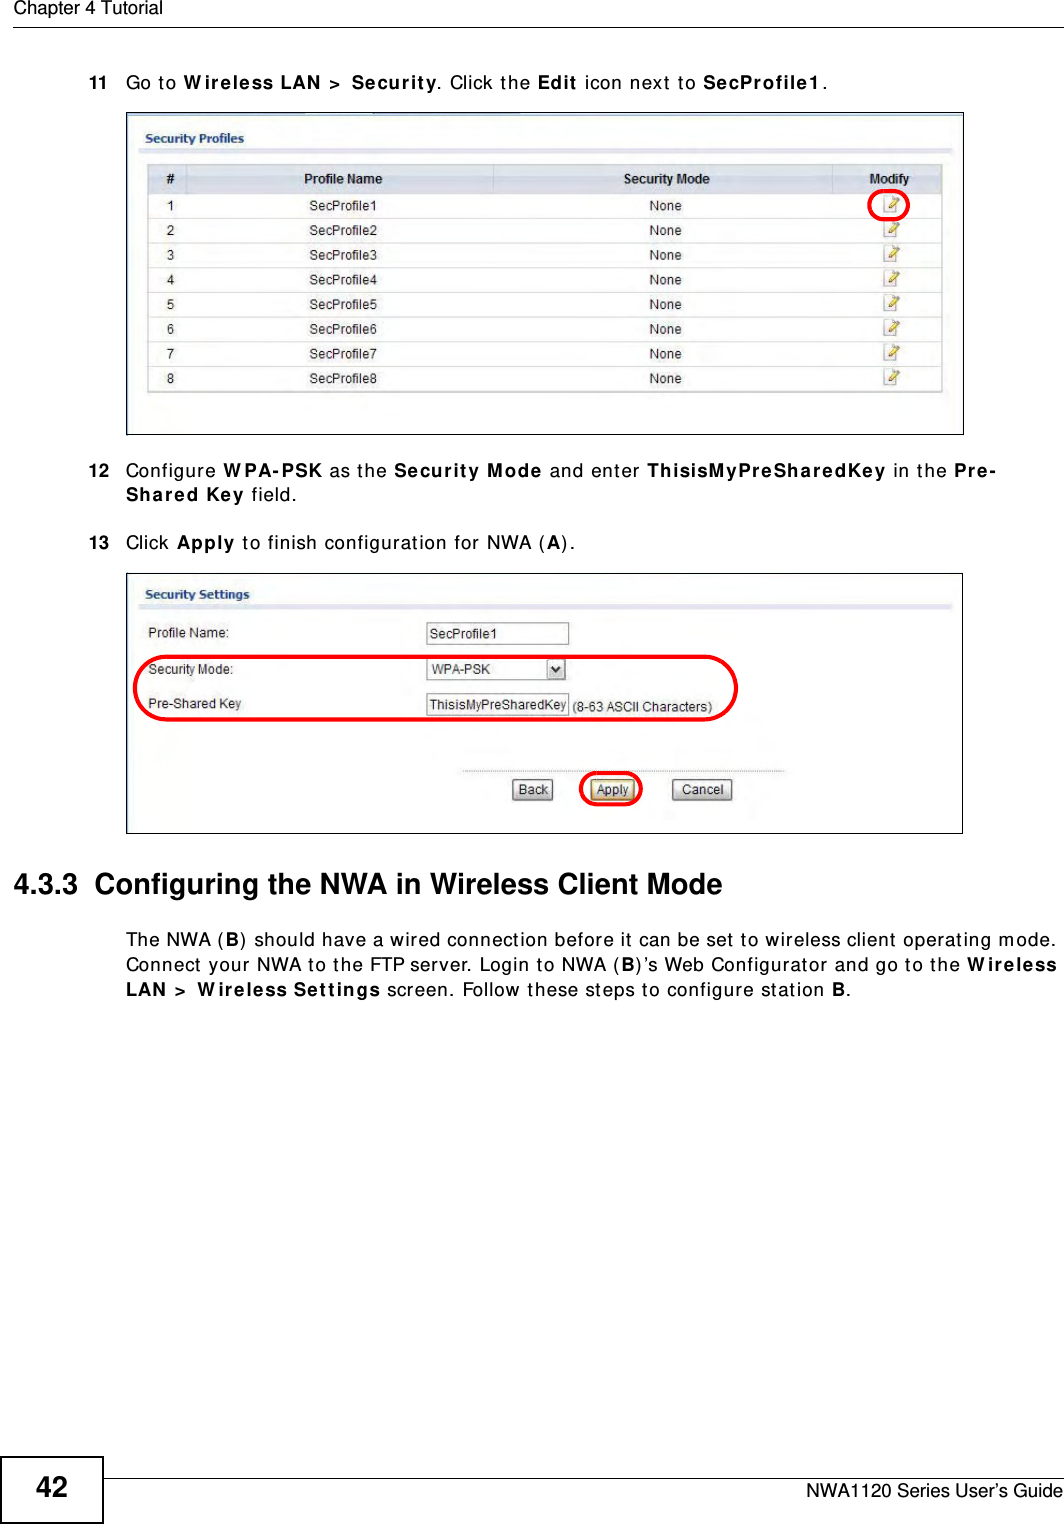 Chapter 4 TutorialNWA1120 Series User’s Guide4211 Go to Wireless LAN &gt; Security. Click the Edit icon next to SecProfile1.  12 Configure WPA-PSK as the Security Mode and enter ThisisMyPreSharedKey in the Pre-Shared Key field.13 Click Apply to finish configuration for NWA (A). 4.3.3  Configuring the NWA in Wireless Client ModeThe NWA (B) should have a wired connection before it can be set to wireless client operating mode. Connect your NWA to the FTP server. Login to NWA (B)’s Web Configurator and go to the Wireless LAN &gt; Wireless Settings screen. Follow these steps to configure station B.